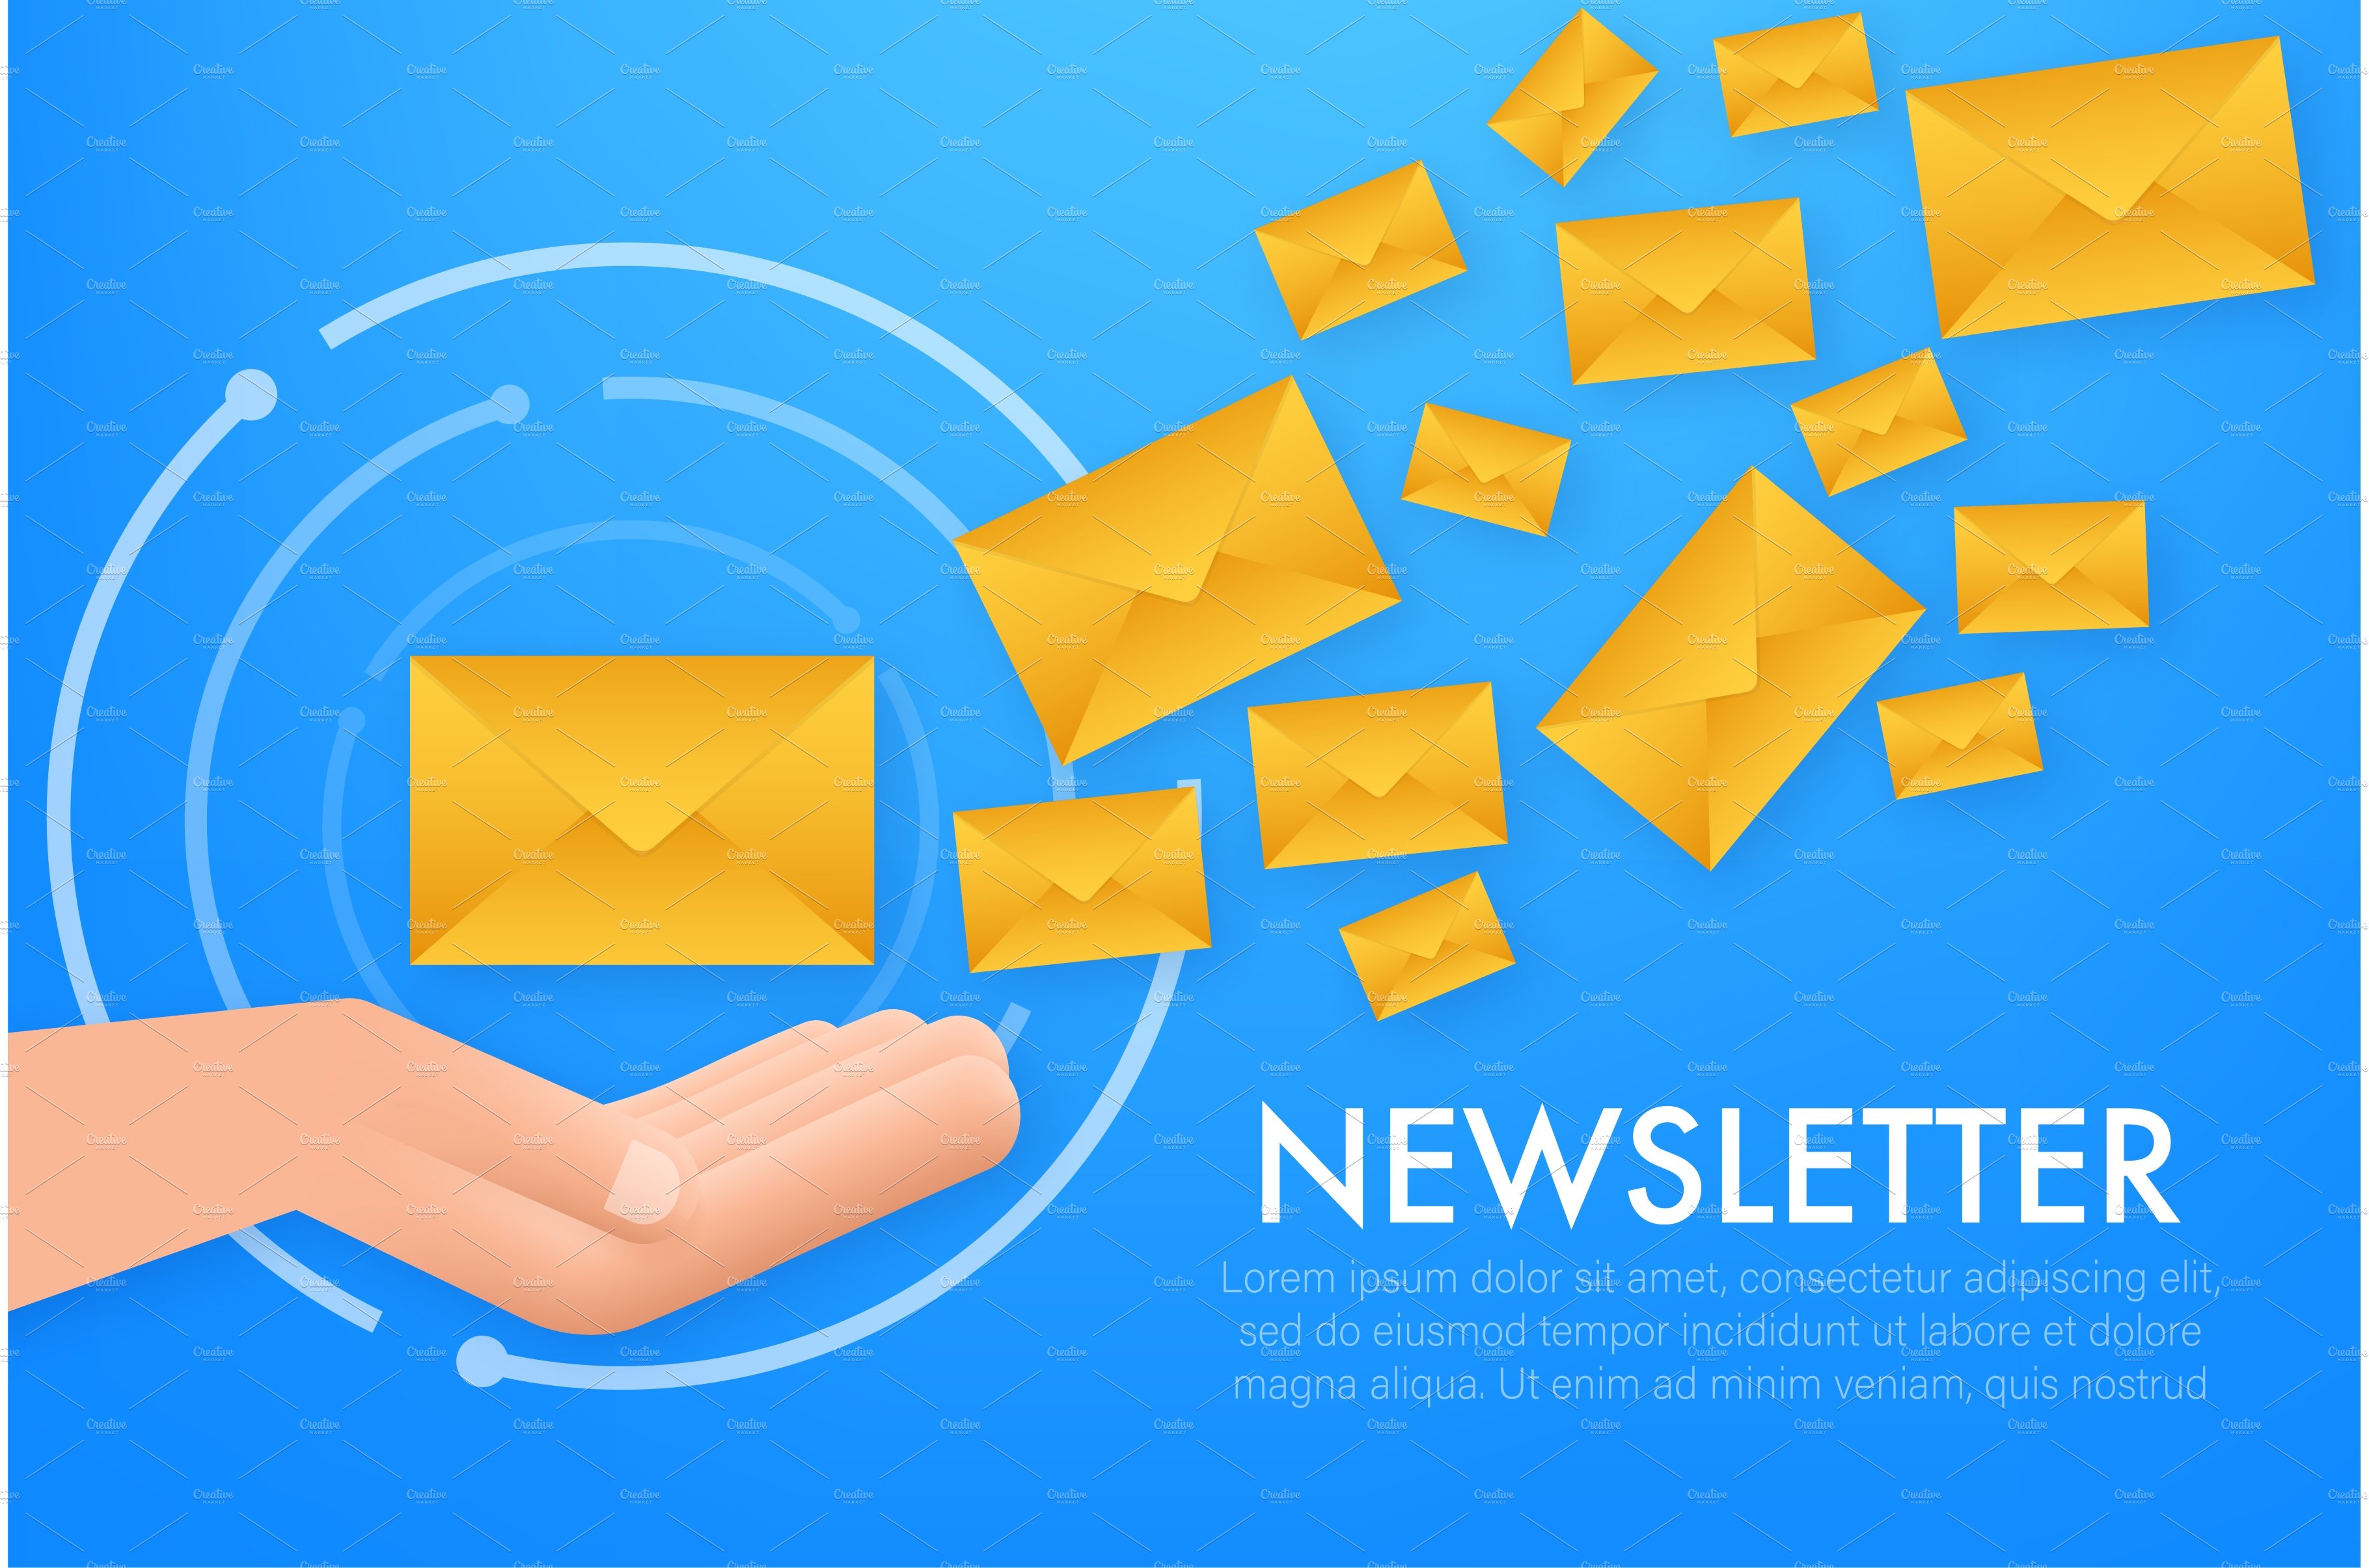 Envelope with a newsletter concept cover image.